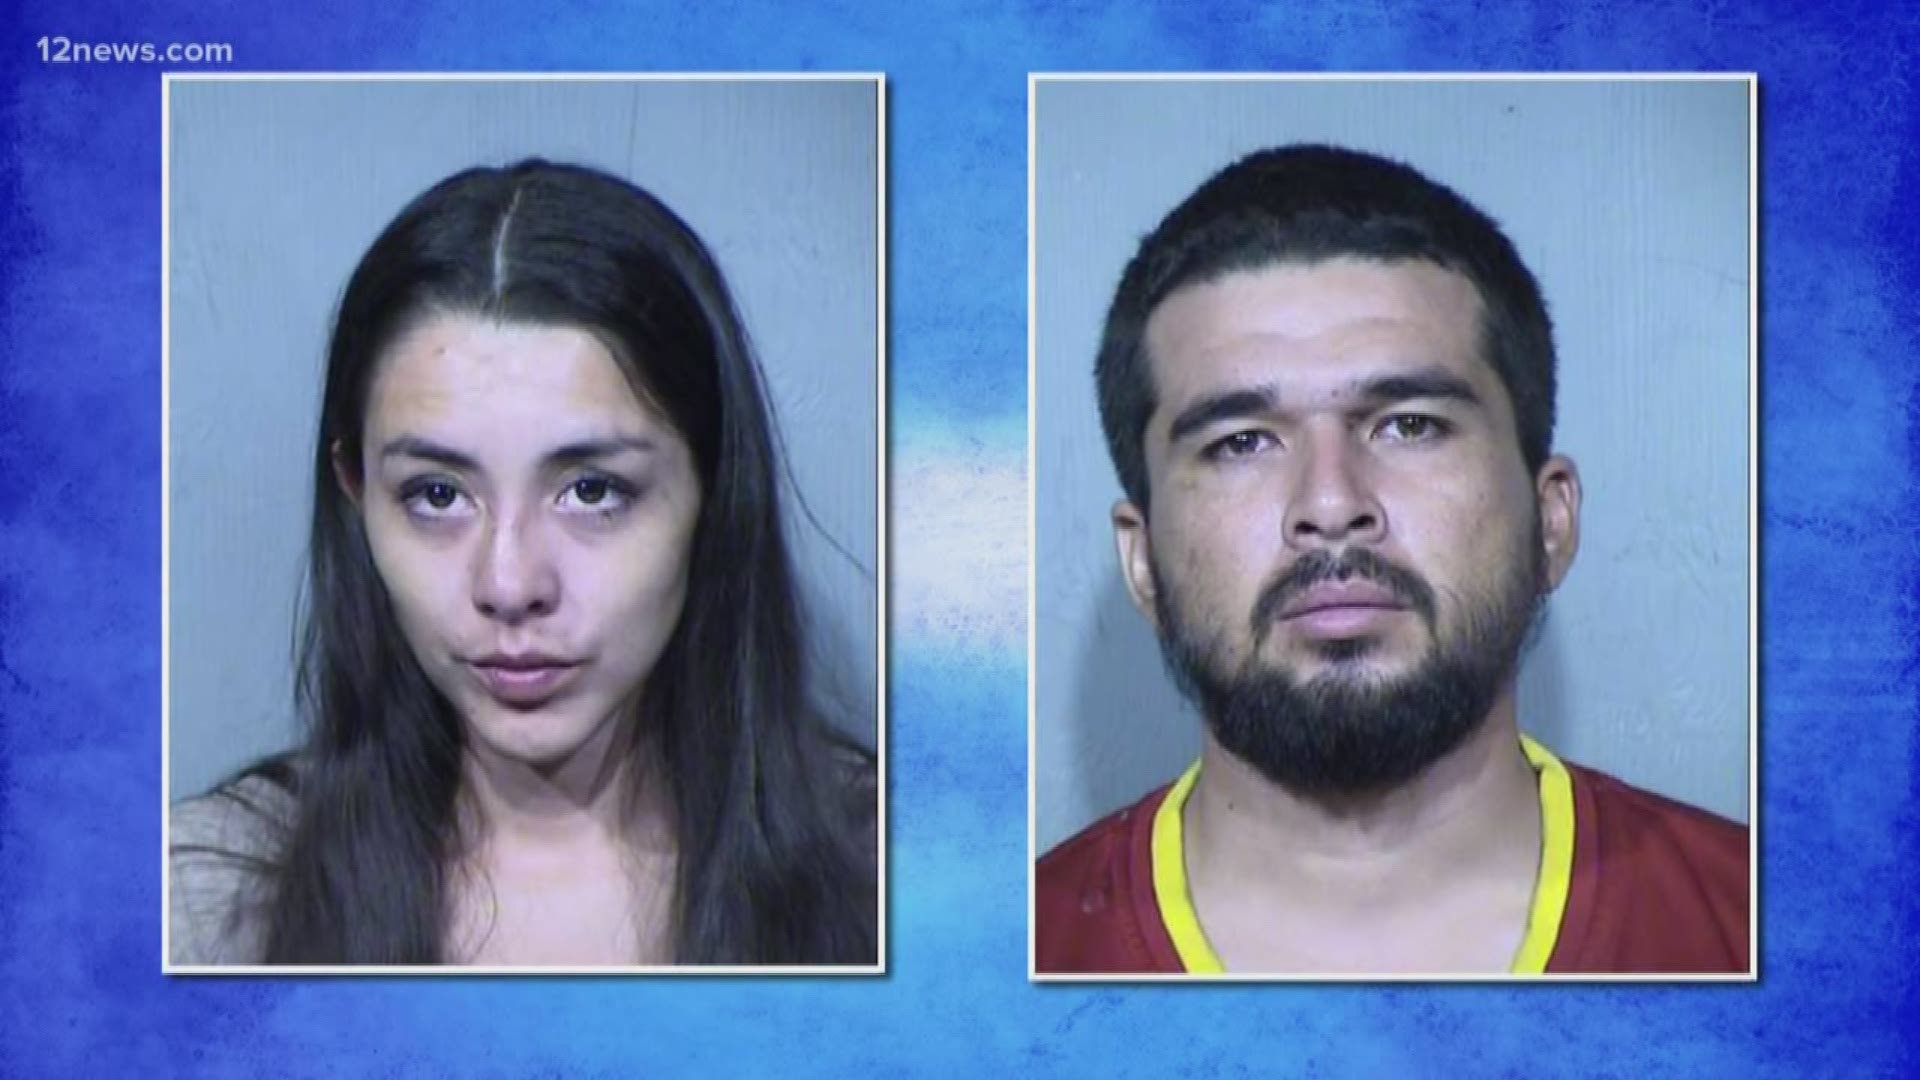 A couple was arrested last week after they were found smoking fentanyl in a car with their young daughter in the back seat, according to court documents.